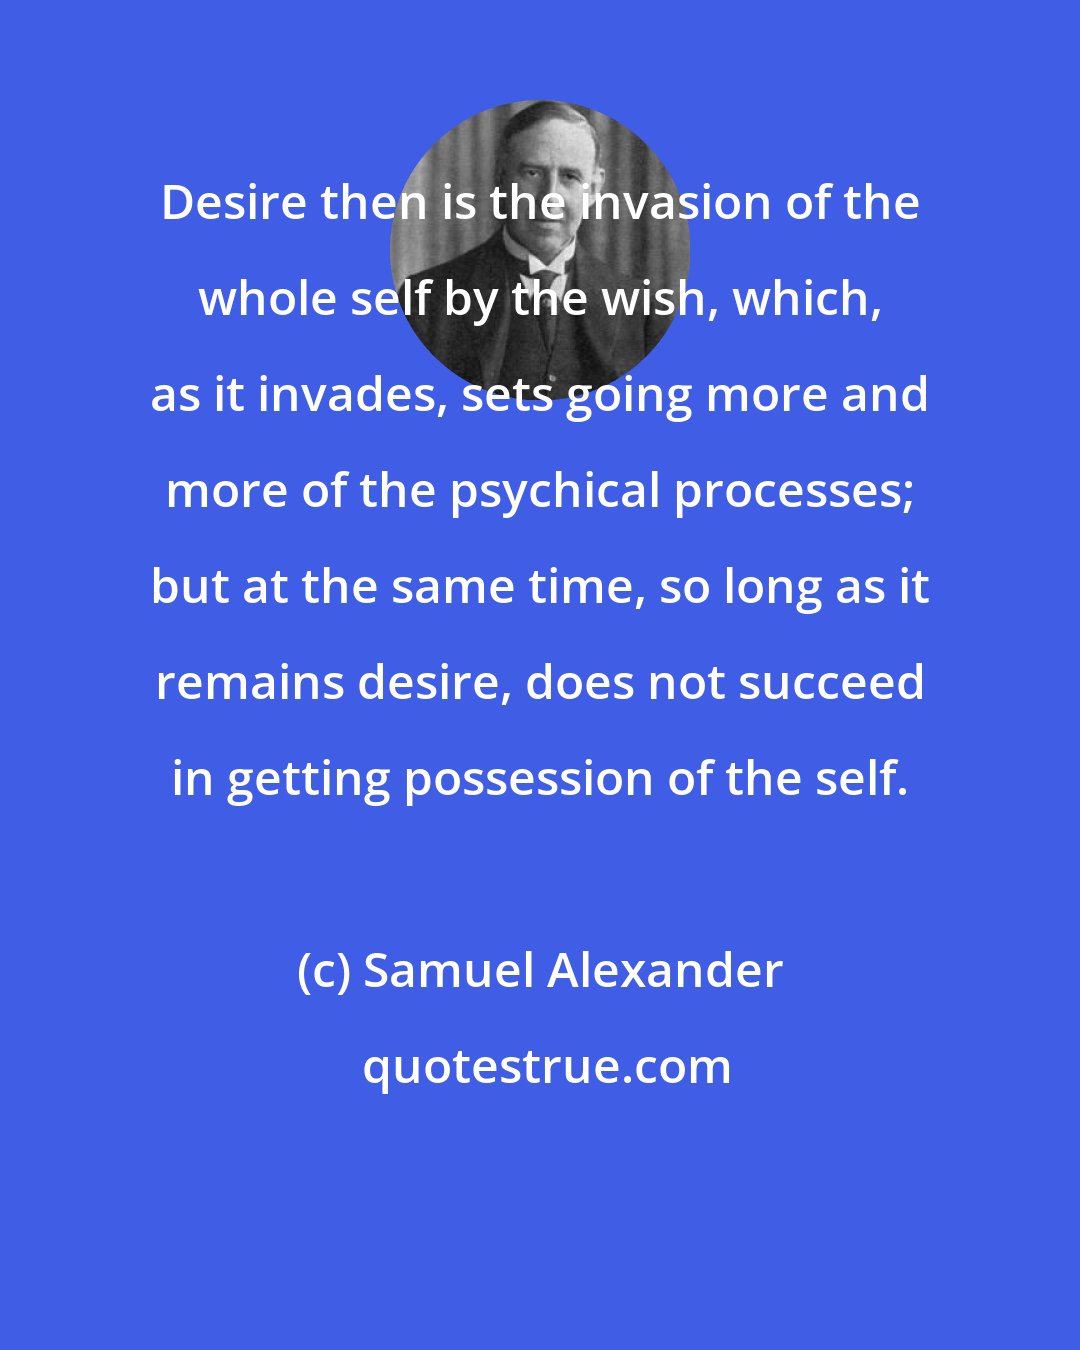 Samuel Alexander: Desire then is the invasion of the whole self by the wish, which, as it invades, sets going more and more of the psychical processes; but at the same time, so long as it remains desire, does not succeed in getting possession of the self.